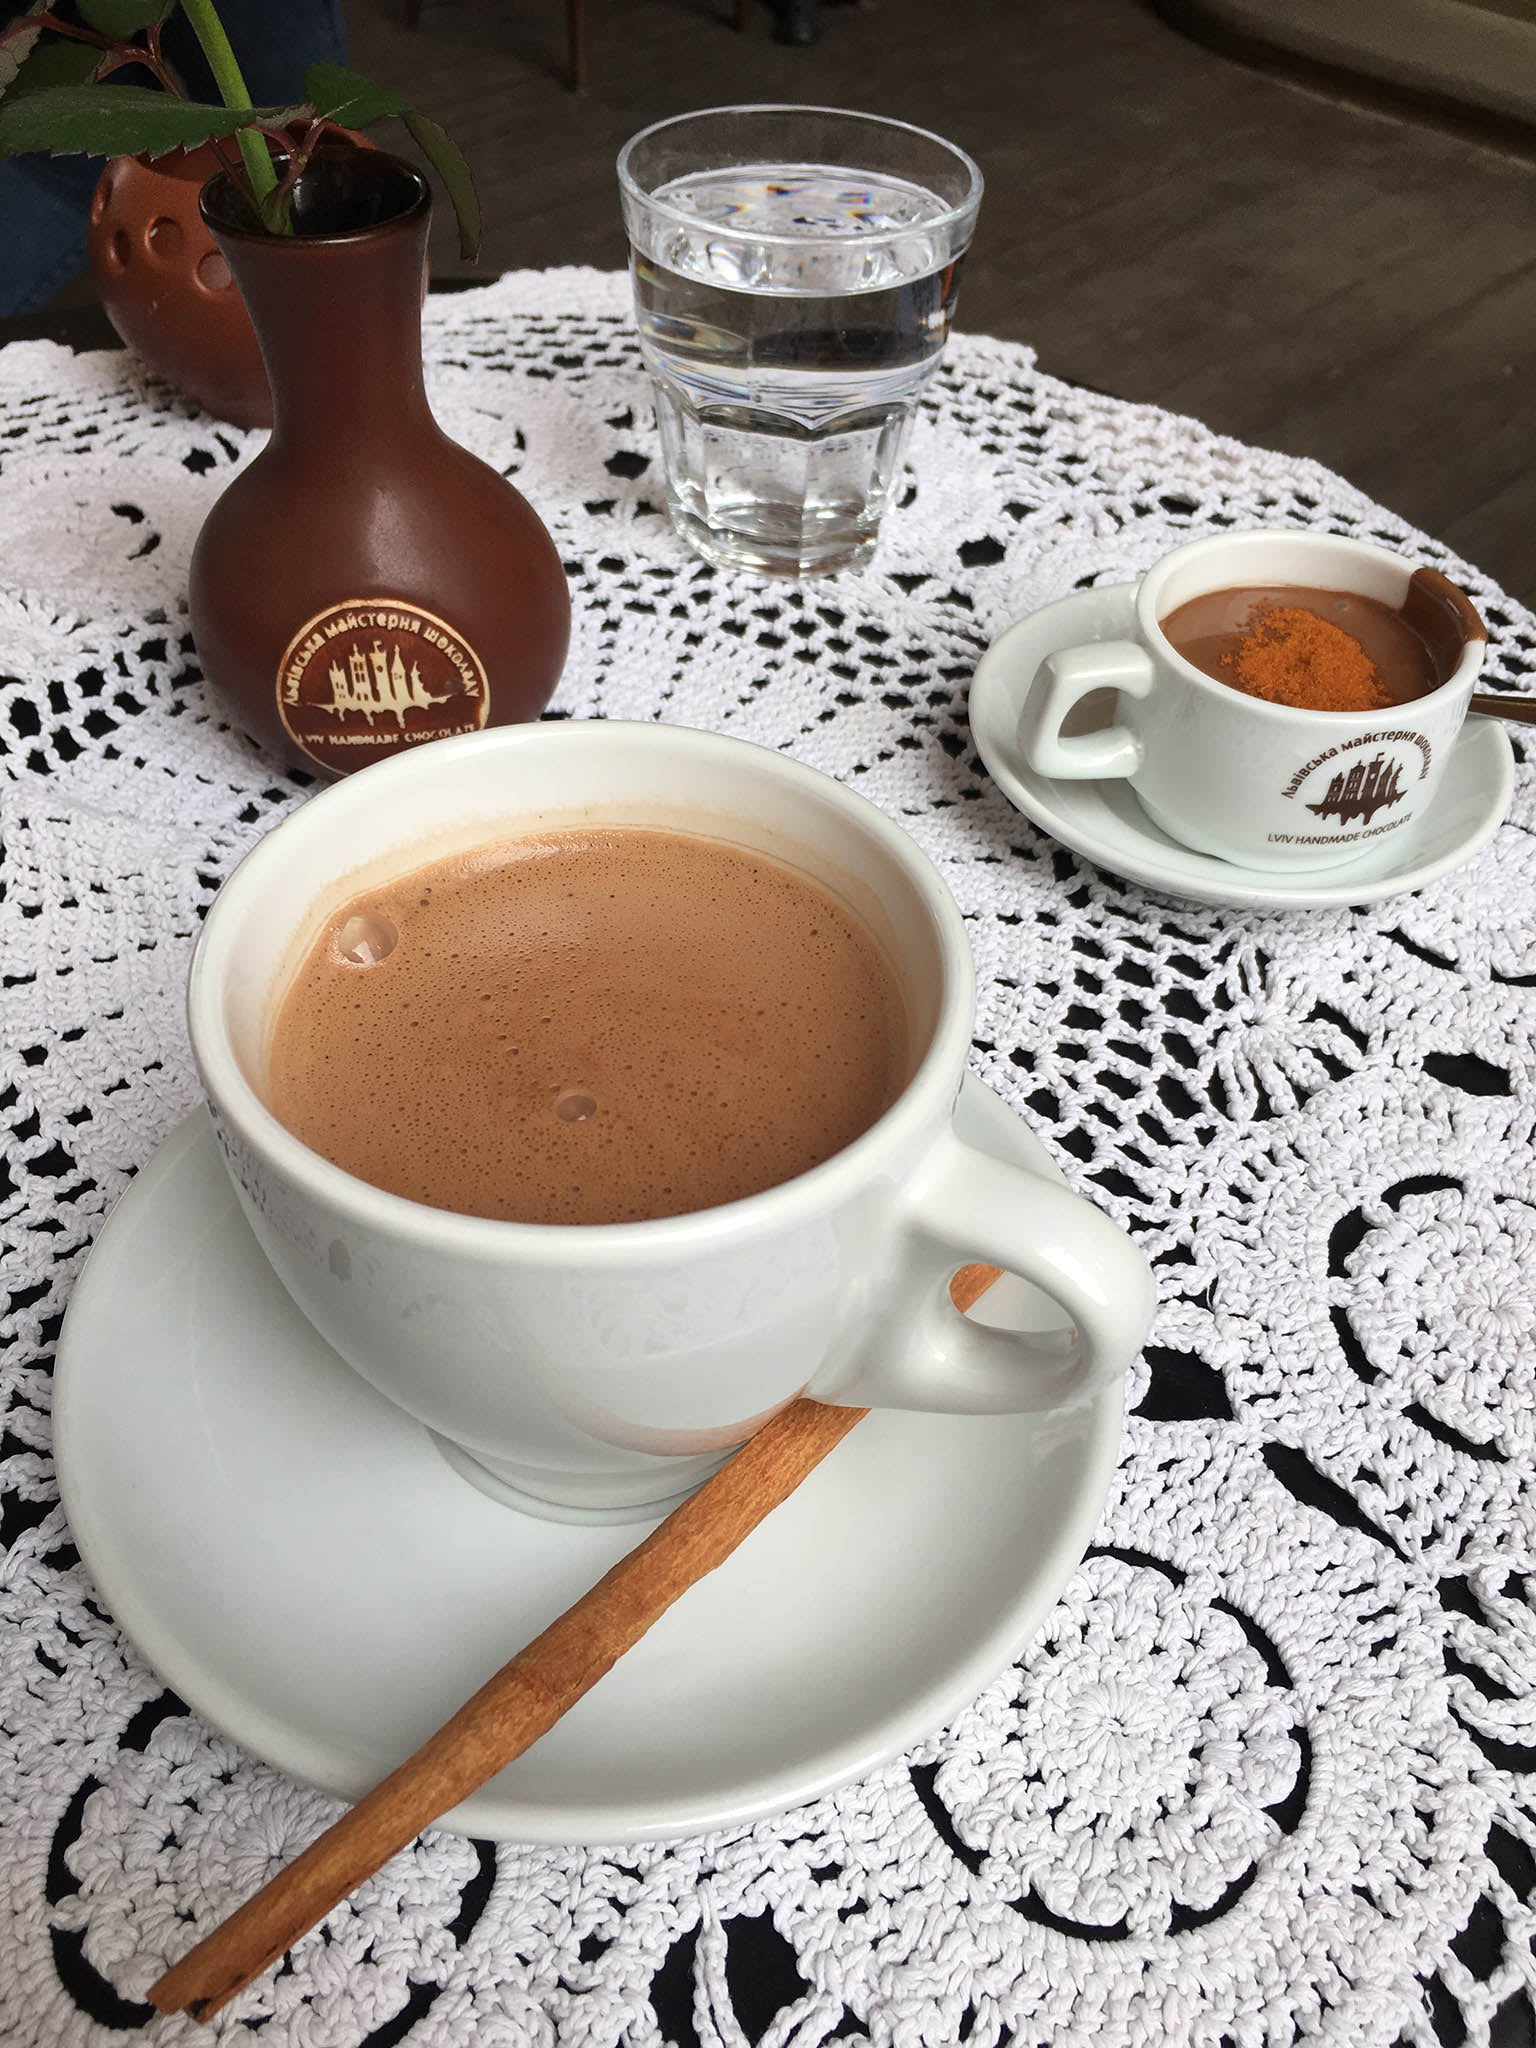 A traditional Lviv hot chocolate is large, spiced and comes with a cinnamon stick